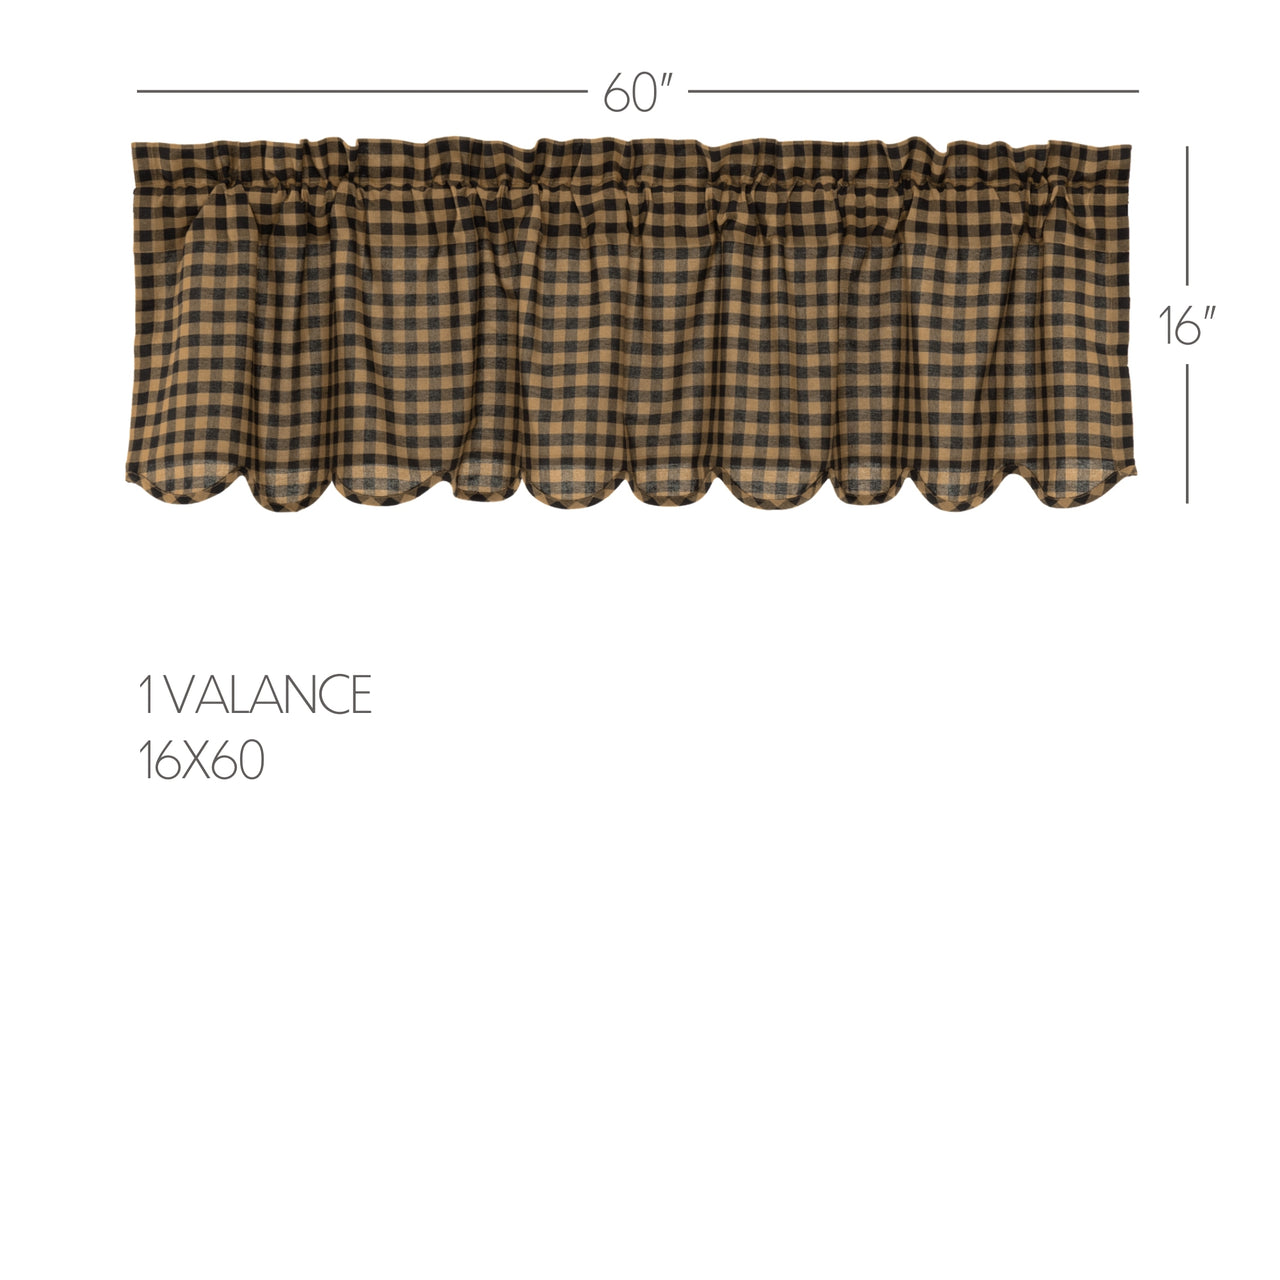 Black Check Scalloped Valance Curtain 16x60 VHC Brands